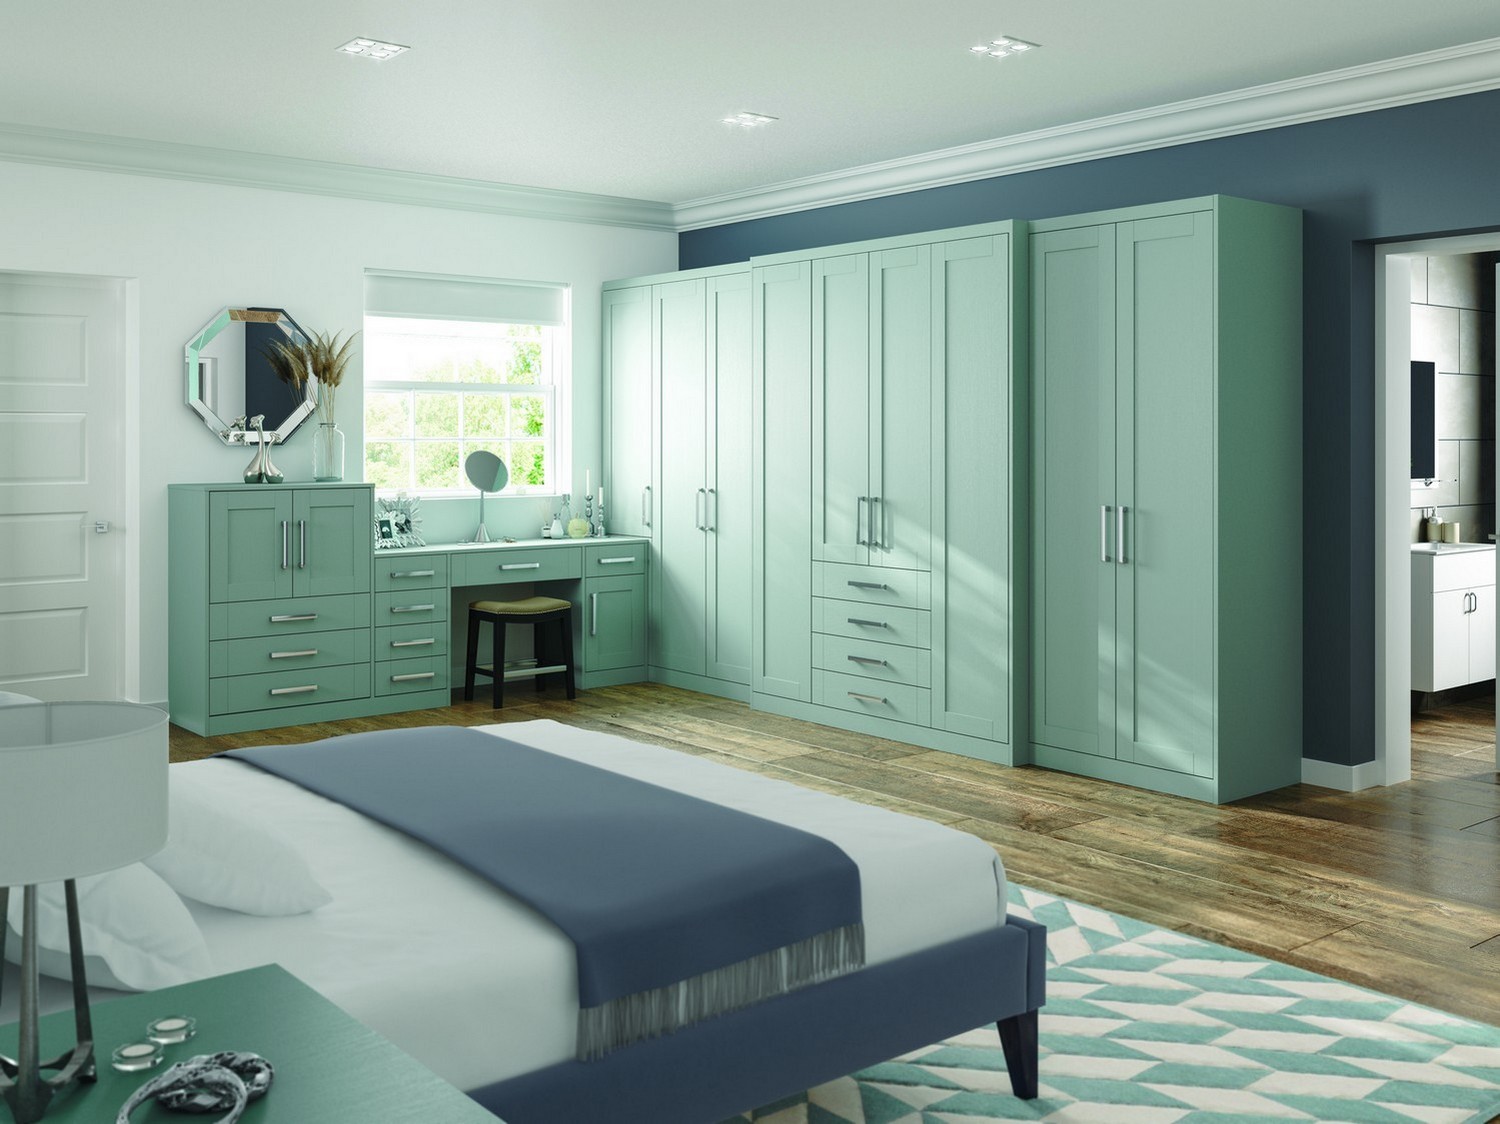 A green shaker bedroom furniture set designed for our client in St Helens featuring a simple chrome handle. This bedroom design feature various wardrobes, dressing table and bedside cabinets.